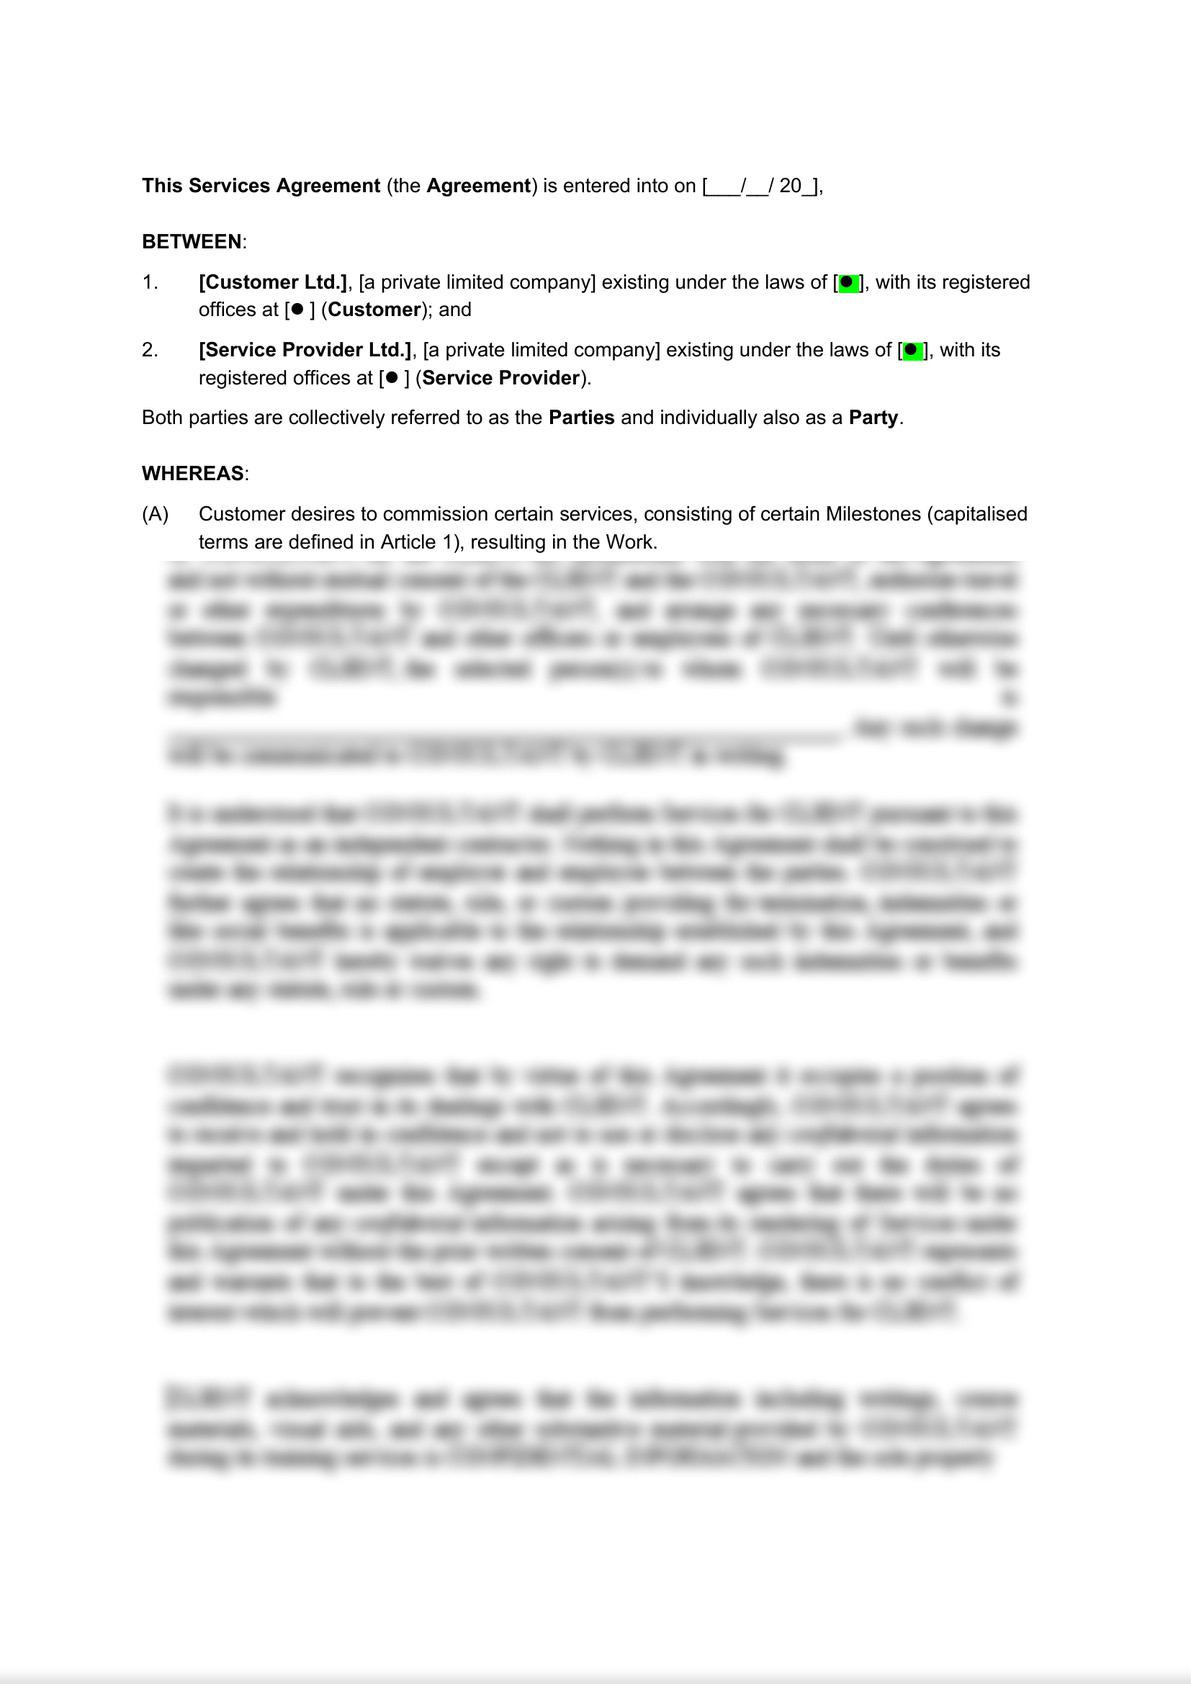 Services Agreement-3